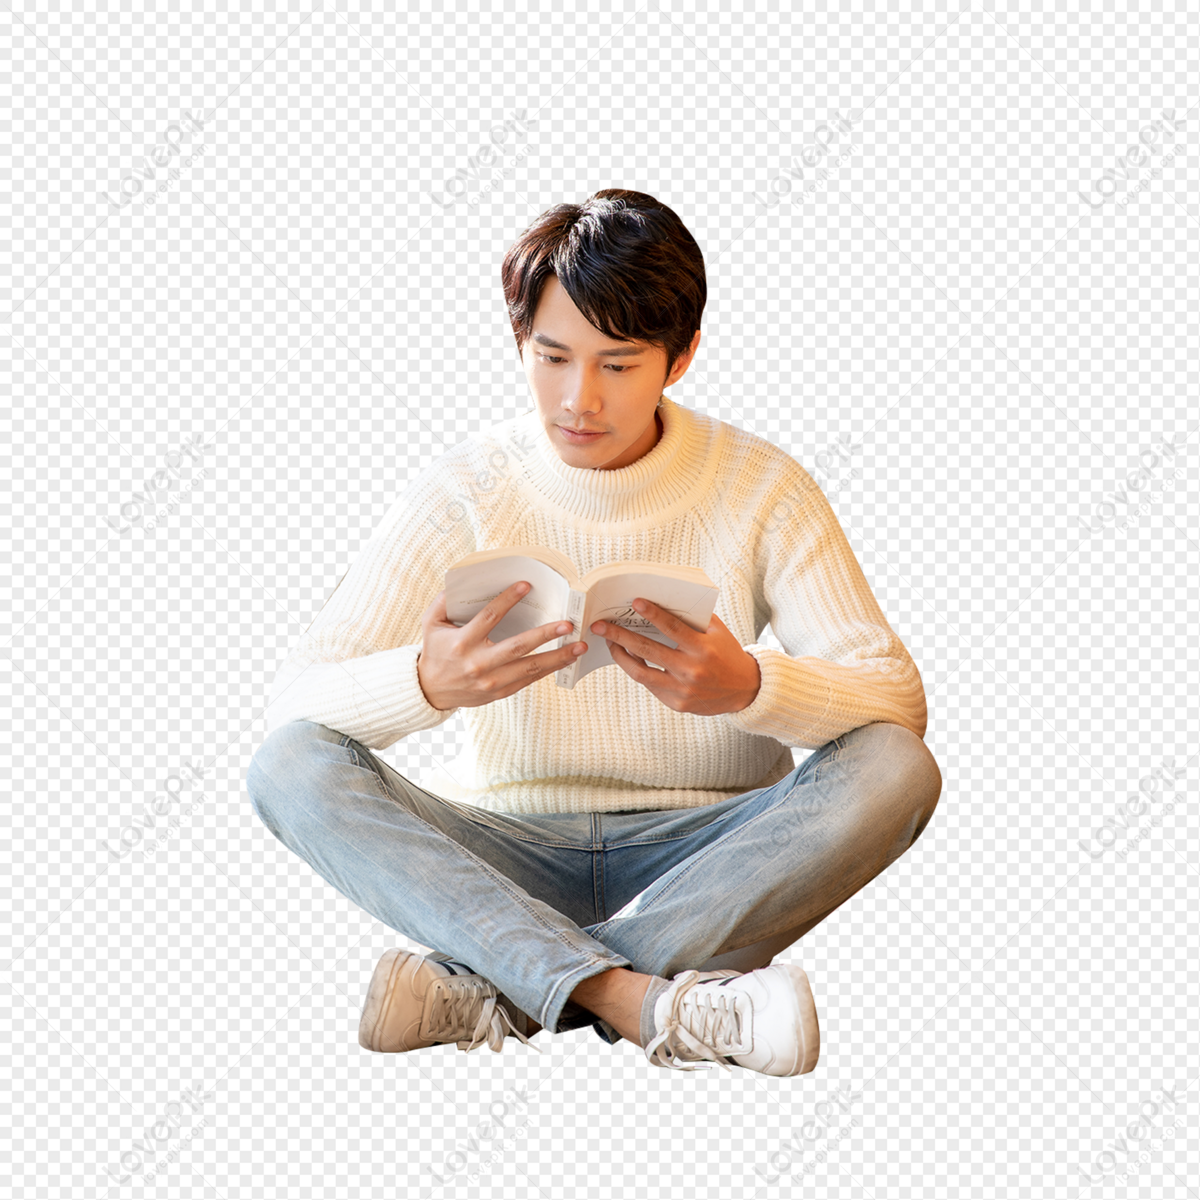 Male sitting on library floor and reading book, young, leisure office, book png white transparent